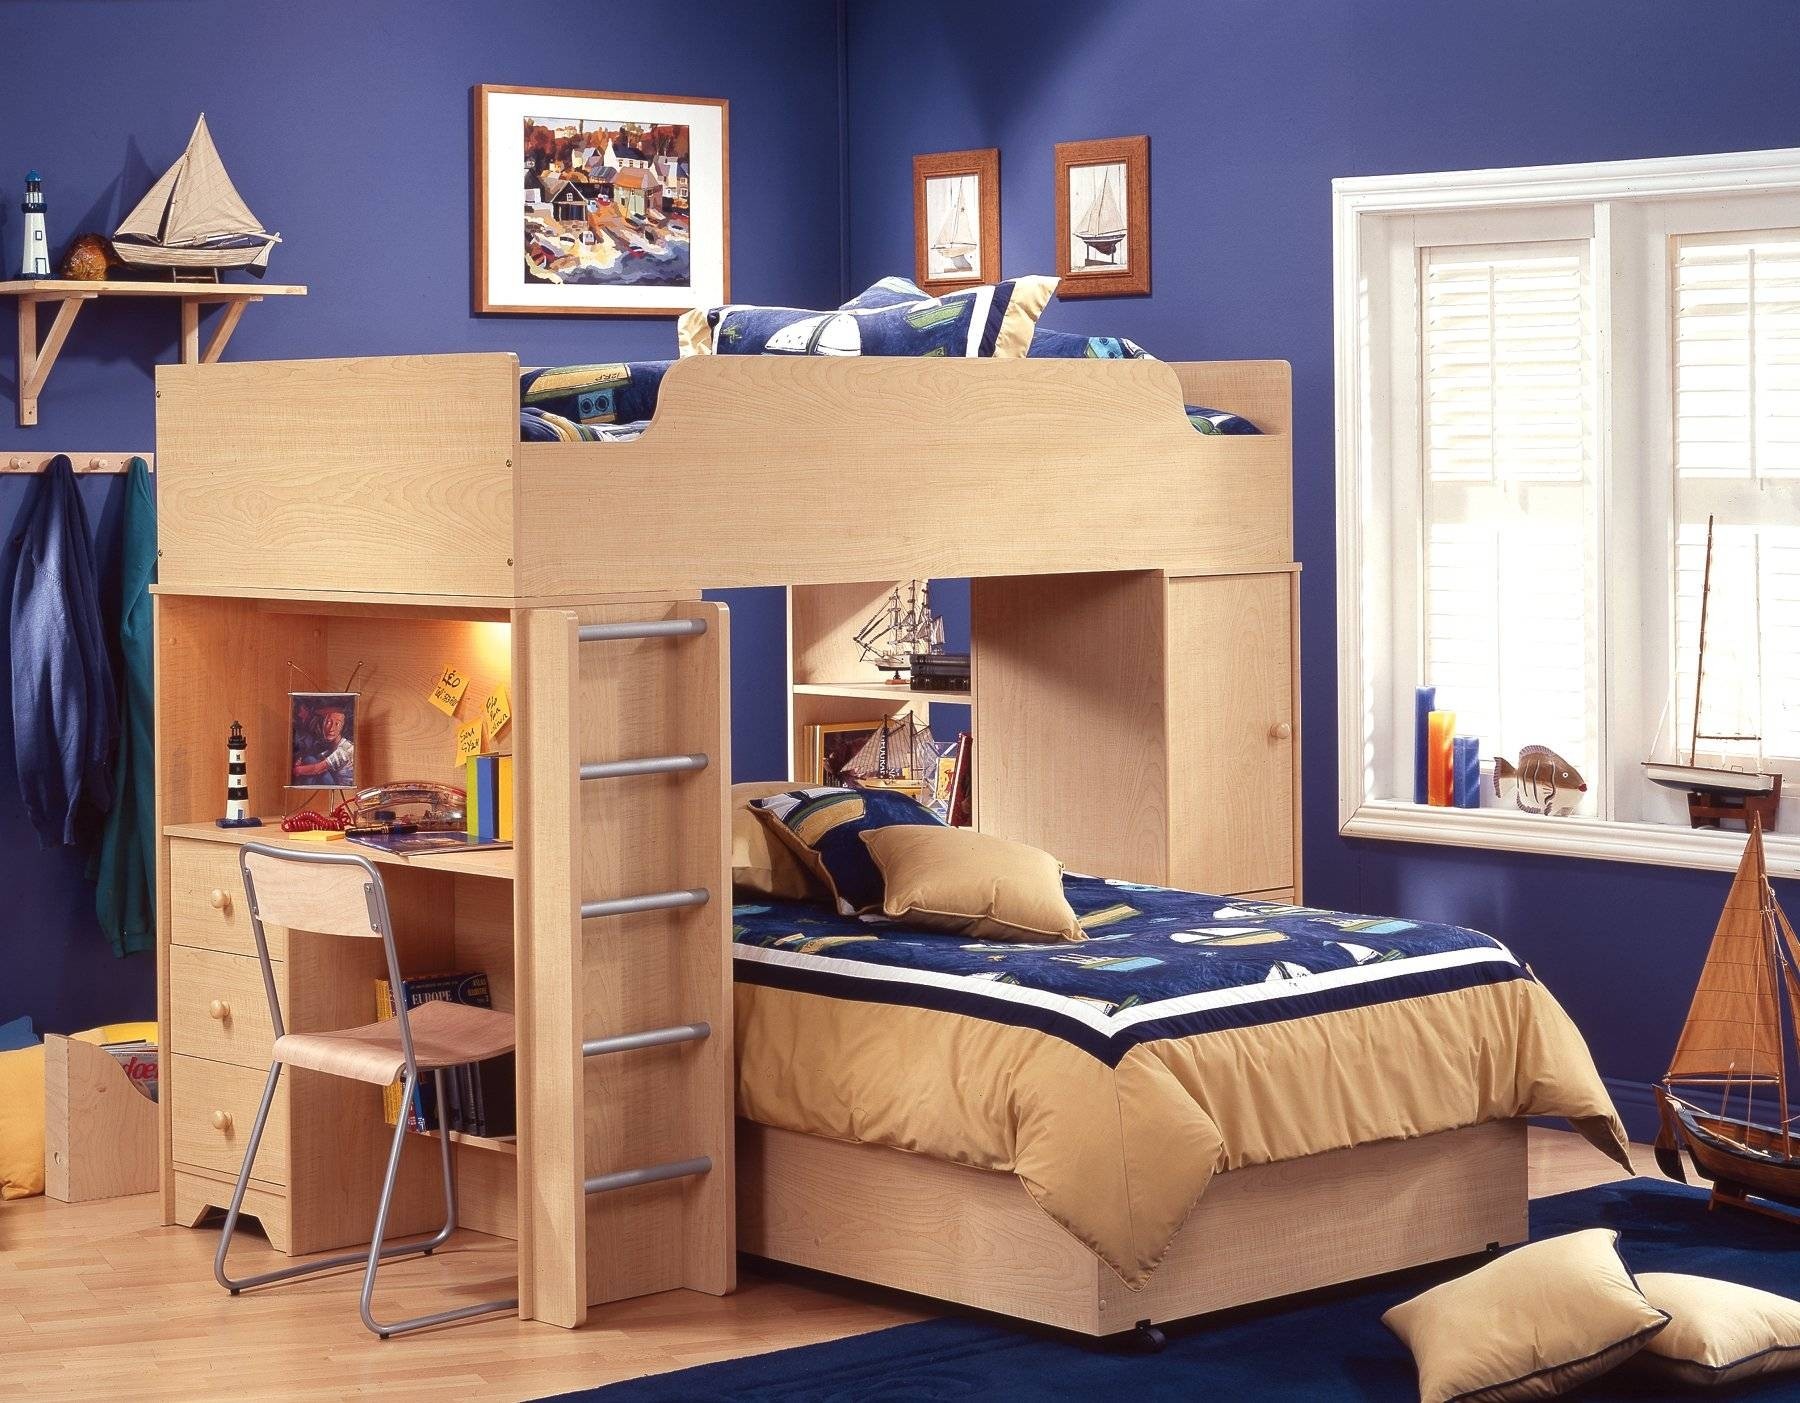 Posts related to wooden bunk bed with futon and desk